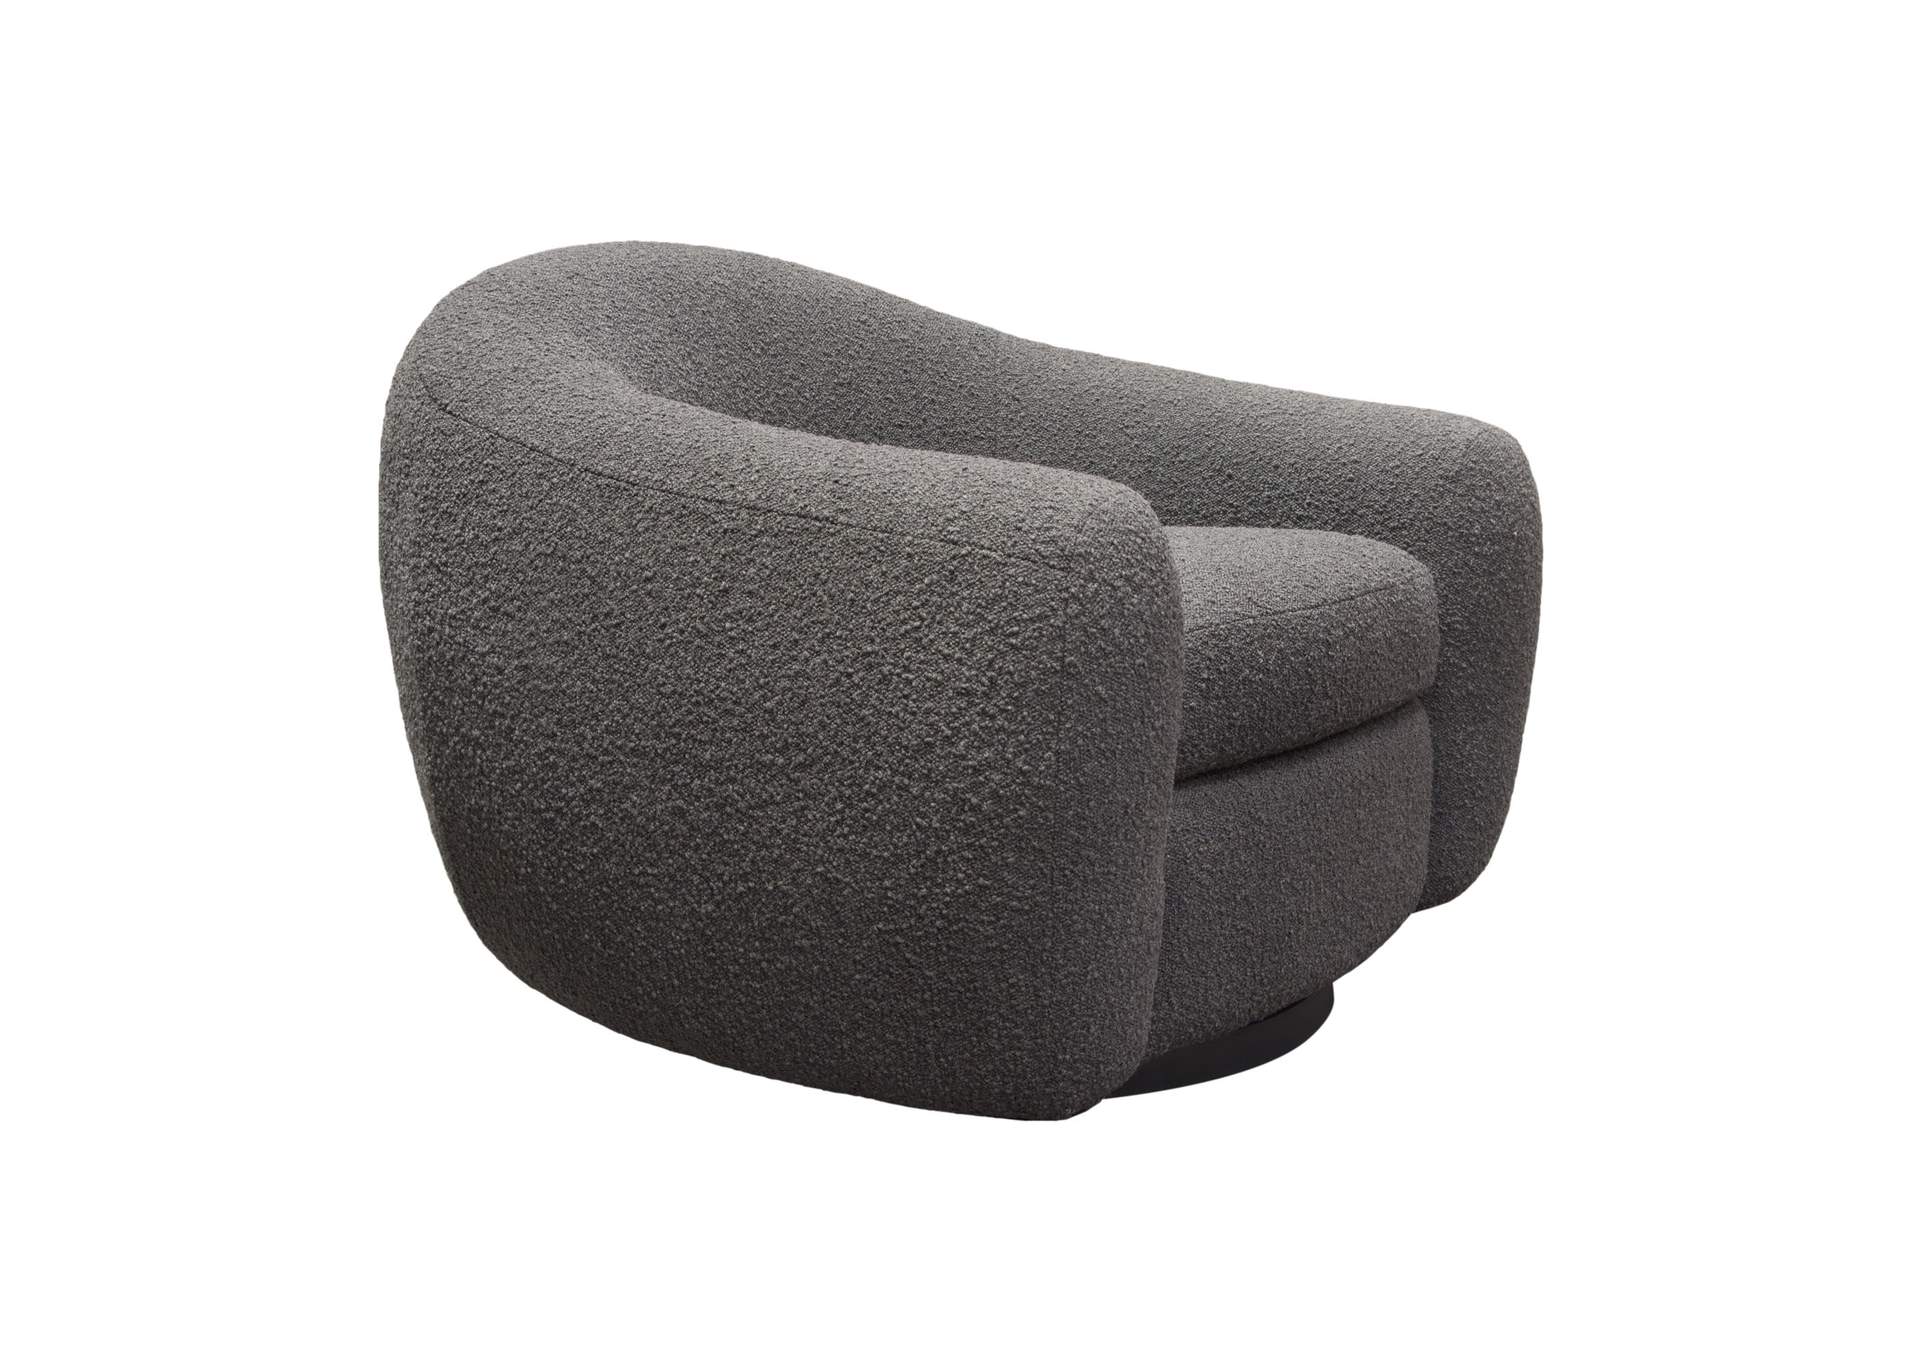 Pascal Swivel Chair in Charcoal Boucle Textured Fabric w/ Contoured Arms & Back by Diamond Sofa,Diamond Sofa